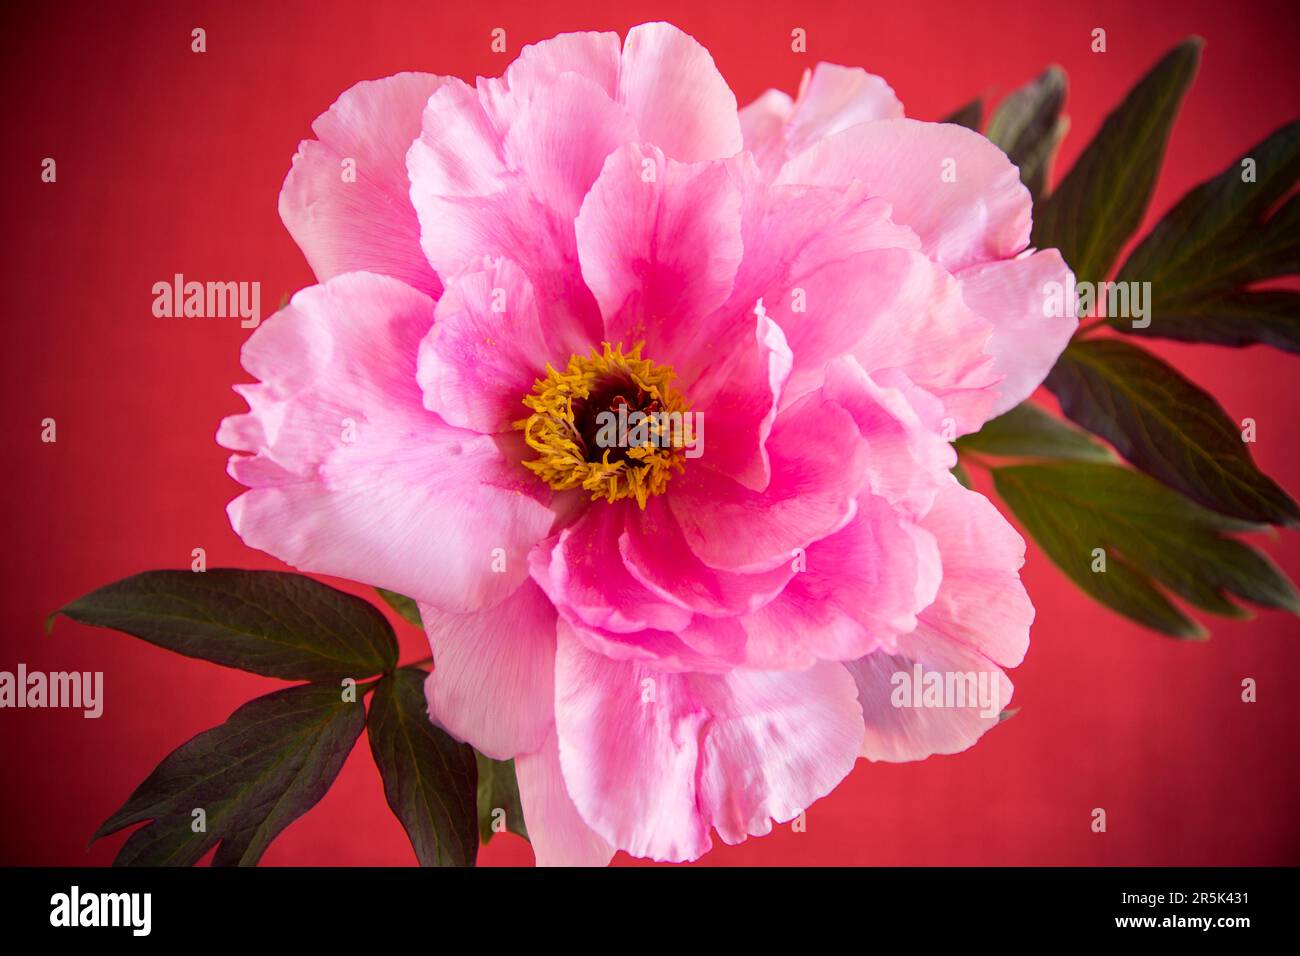 beautiful pink big tree peony flower isolated on red background Stock Photo